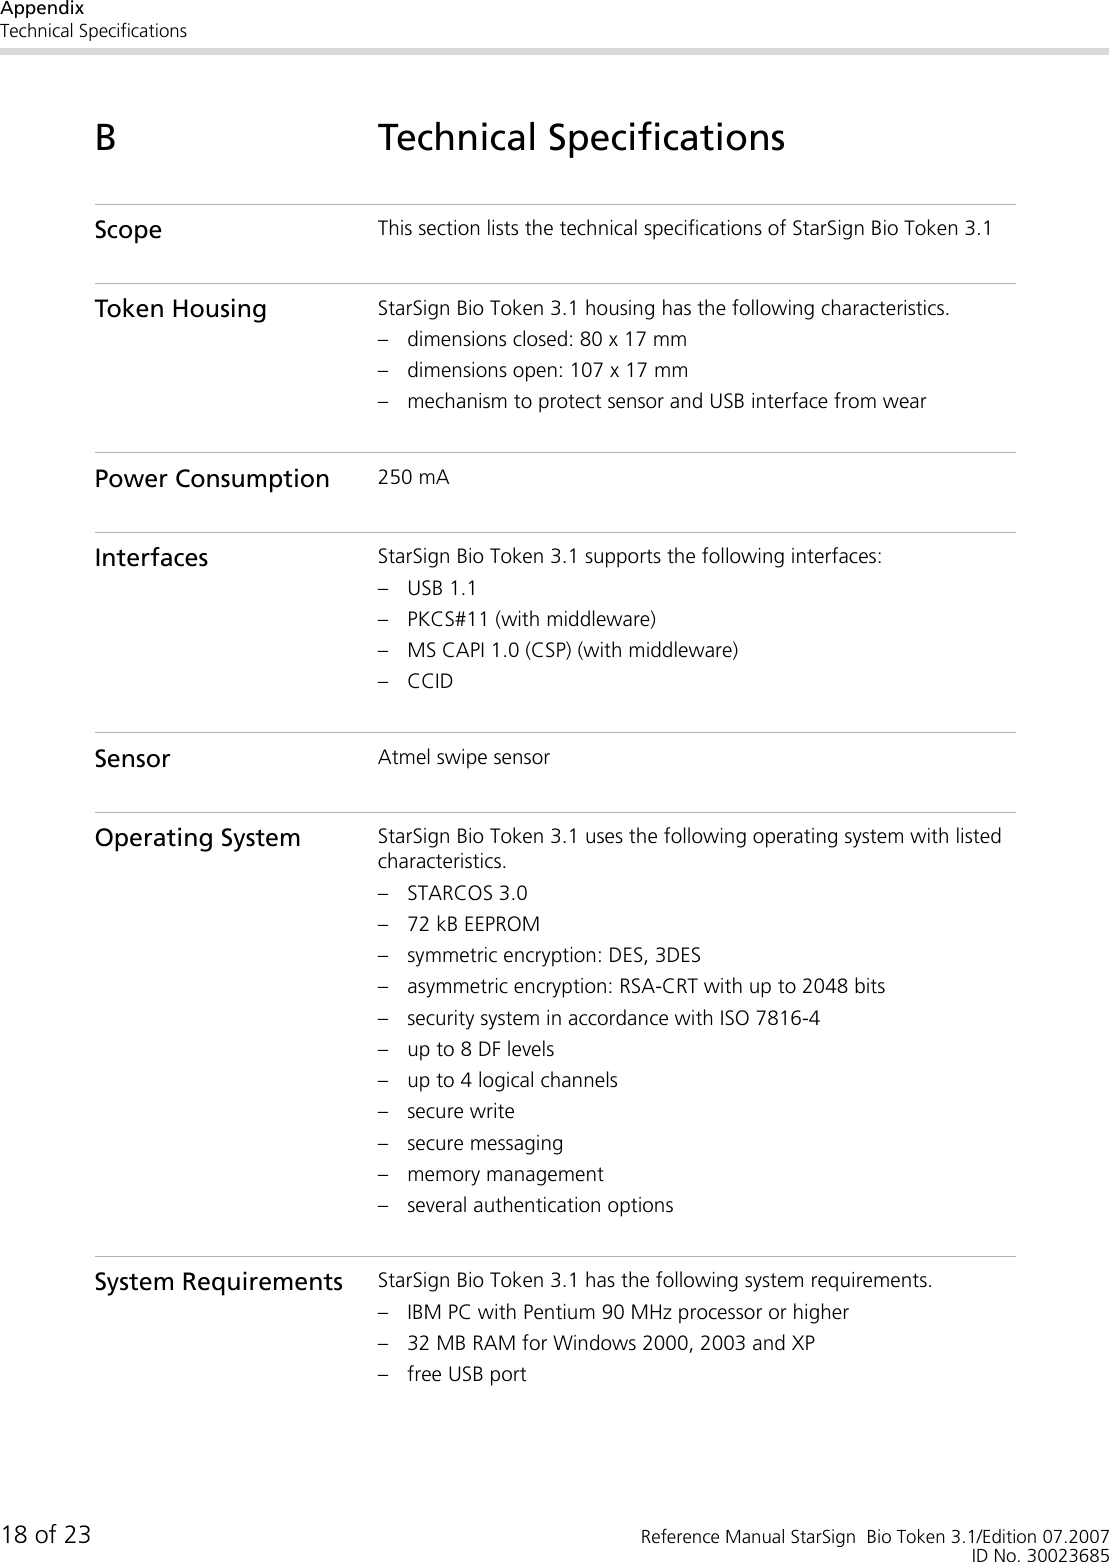 AppendixTechnical Specifications18 of 23 Reference Manual StarSign  Bio Token 3.1/Edition 07.2007ID No. 30023685B Technical SpecificationsScope This section lists the technical specifications of StarSign Bio Token 3.1Token Housing StarSign Bio Token 3.1 housing has the following characteristics.– dimensions closed: 80 x 17 mm– dimensions open: 107 x 17 mm– mechanism to protect sensor and USB interface from wearPower Consumption 250 mAInterfaces StarSign Bio Token 3.1 supports the following interfaces:– USB 1.1– PKCS#11 (with middleware)– MS CAPI 1.0 (CSP) (with middleware)– CCIDSensor Atmel swipe sensorOperating System StarSign Bio Token 3.1 uses the following operating system with listed characteristics.– STARCOS 3.0– 72 kB EEPROM– symmetric encryption: DES, 3DES– asymmetric encryption: RSA-CRT with up to 2048 bits– security system in accordance with ISO 7816-4– up to 8 DF levels– up to 4 logical channels– secure write– secure messaging– memory management– several authentication optionsSystem Requirements StarSign Bio Token 3.1 has the following system requirements.– IBM PC with Pentium 90 MHz processor or higher– 32 MB RAM for Windows 2000, 2003 and XP– free USB port